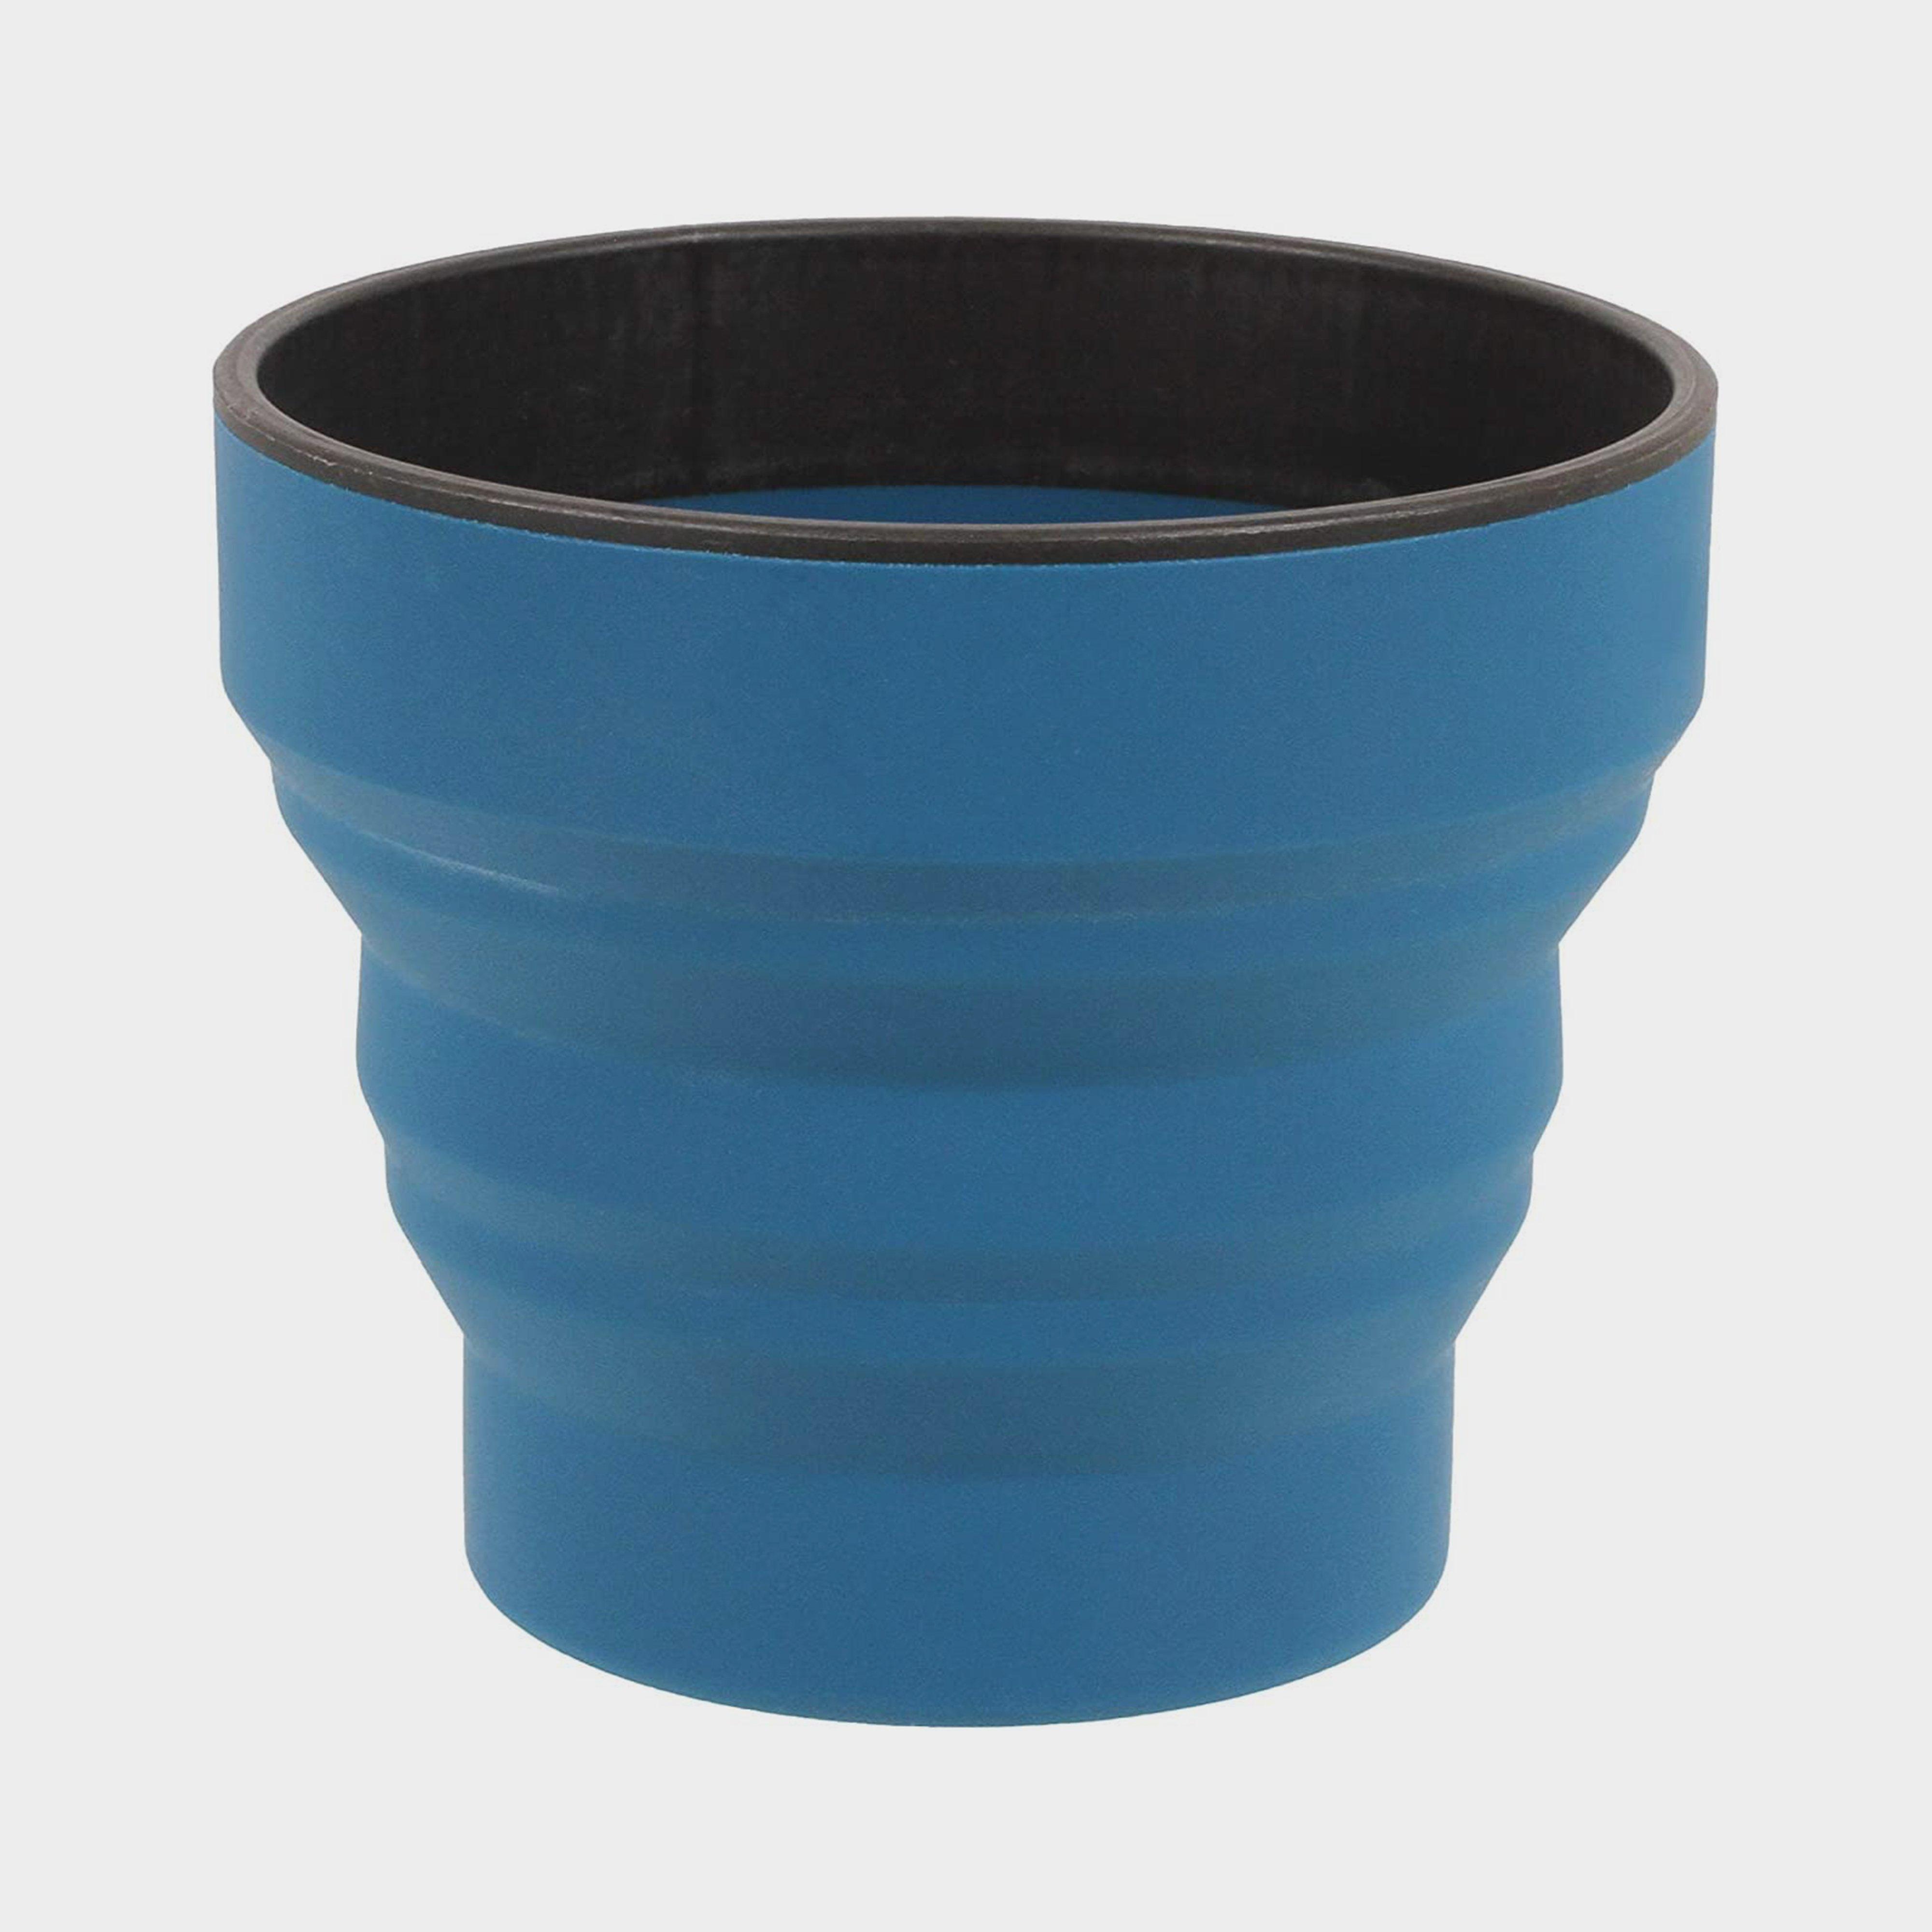 Lifeventure Ellipse Collapsible Cup - Navy Blue/navy Blue  Navy Blue/navy Blue